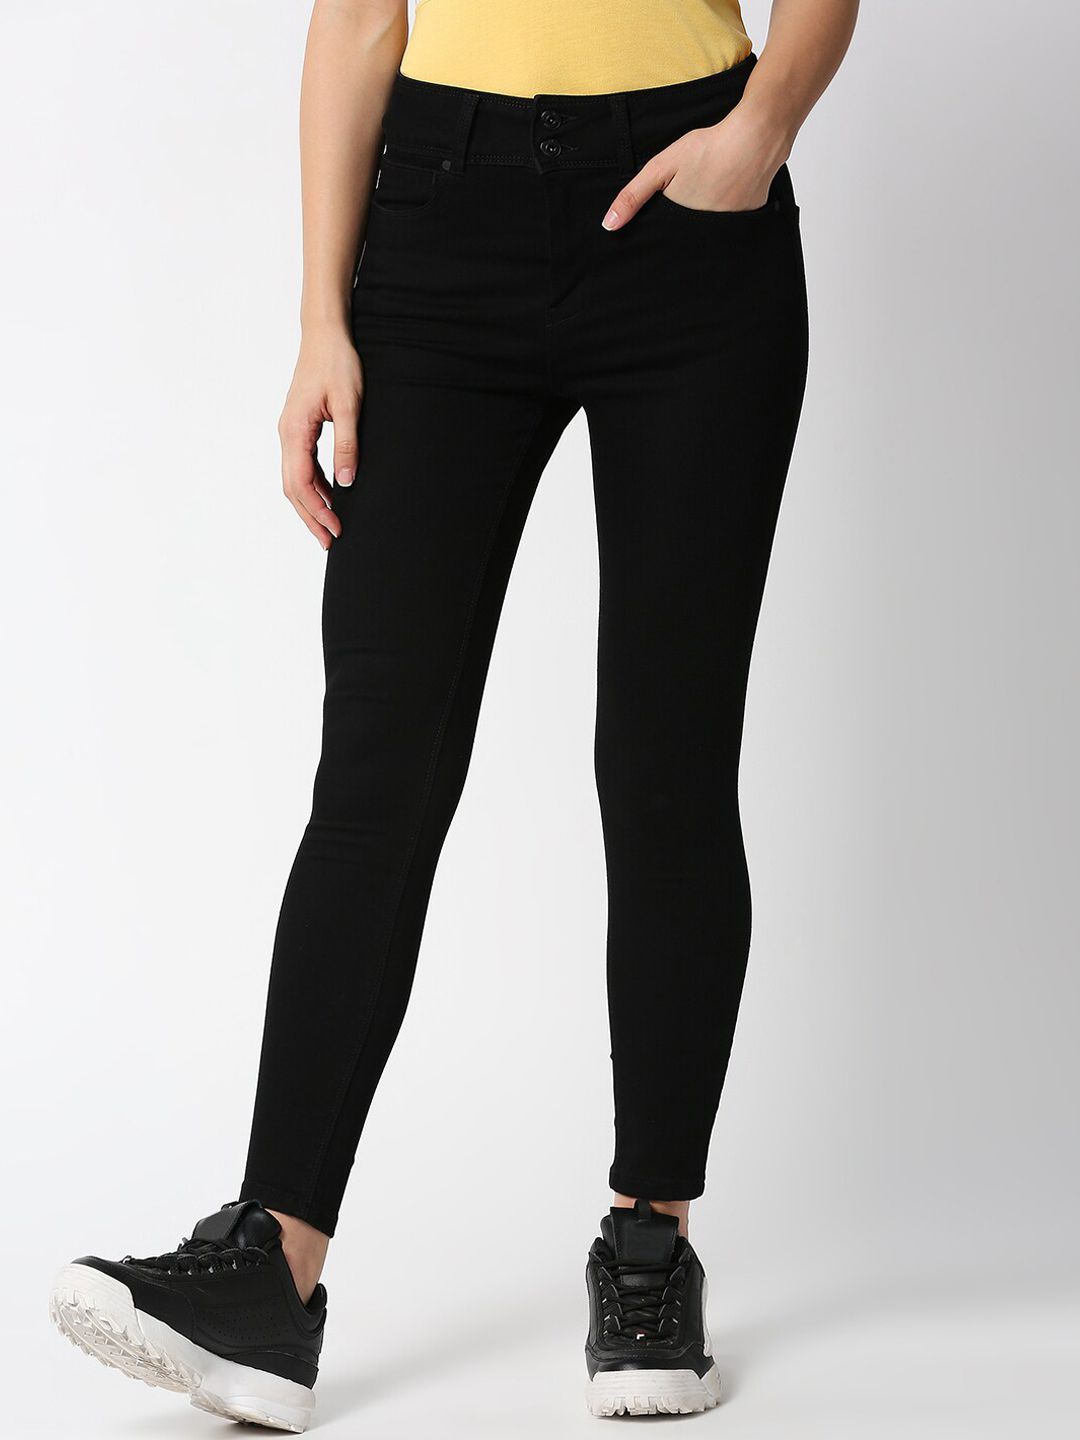 Pepe Jeans Women Black Skinny Fit High-Rise Jeans Price in India